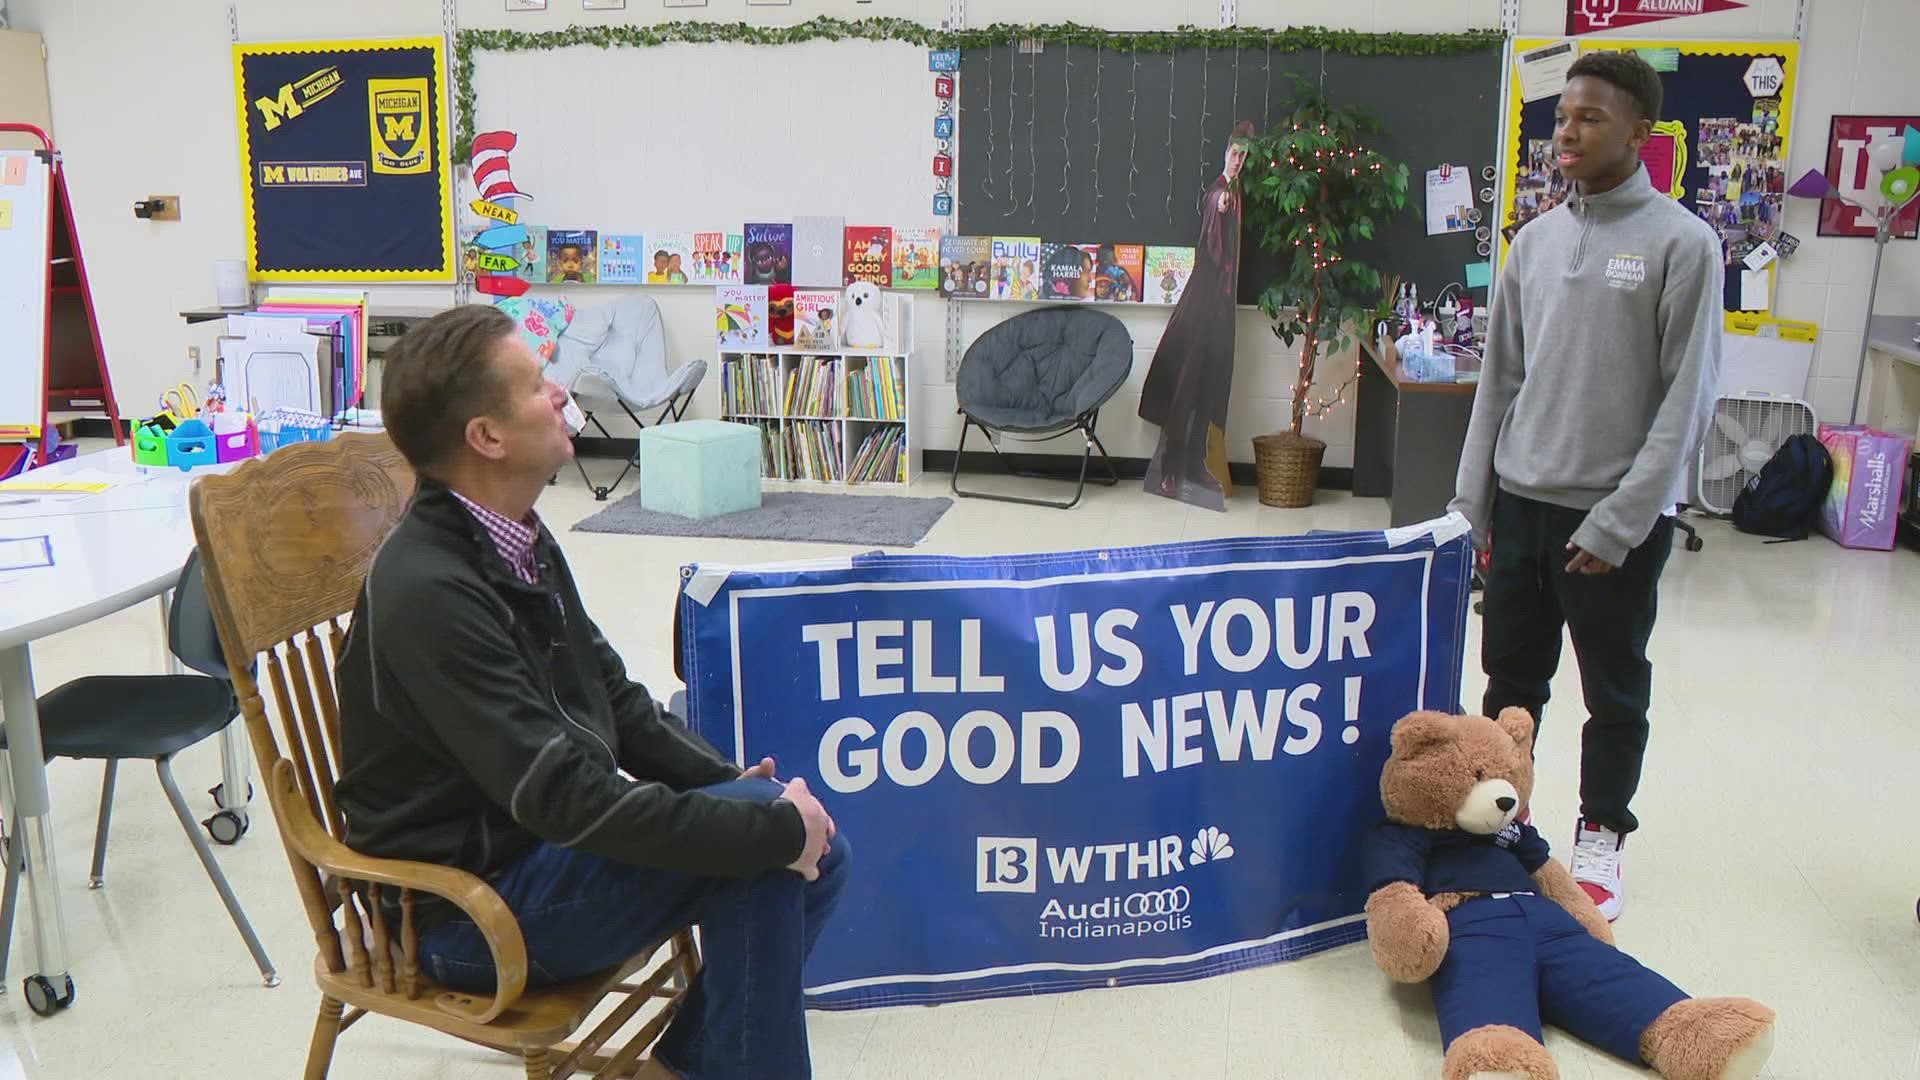 13Sports director Dave Calabro visited Emma Donnan Elementary School on the south side of Indianapolis for this week's good news.